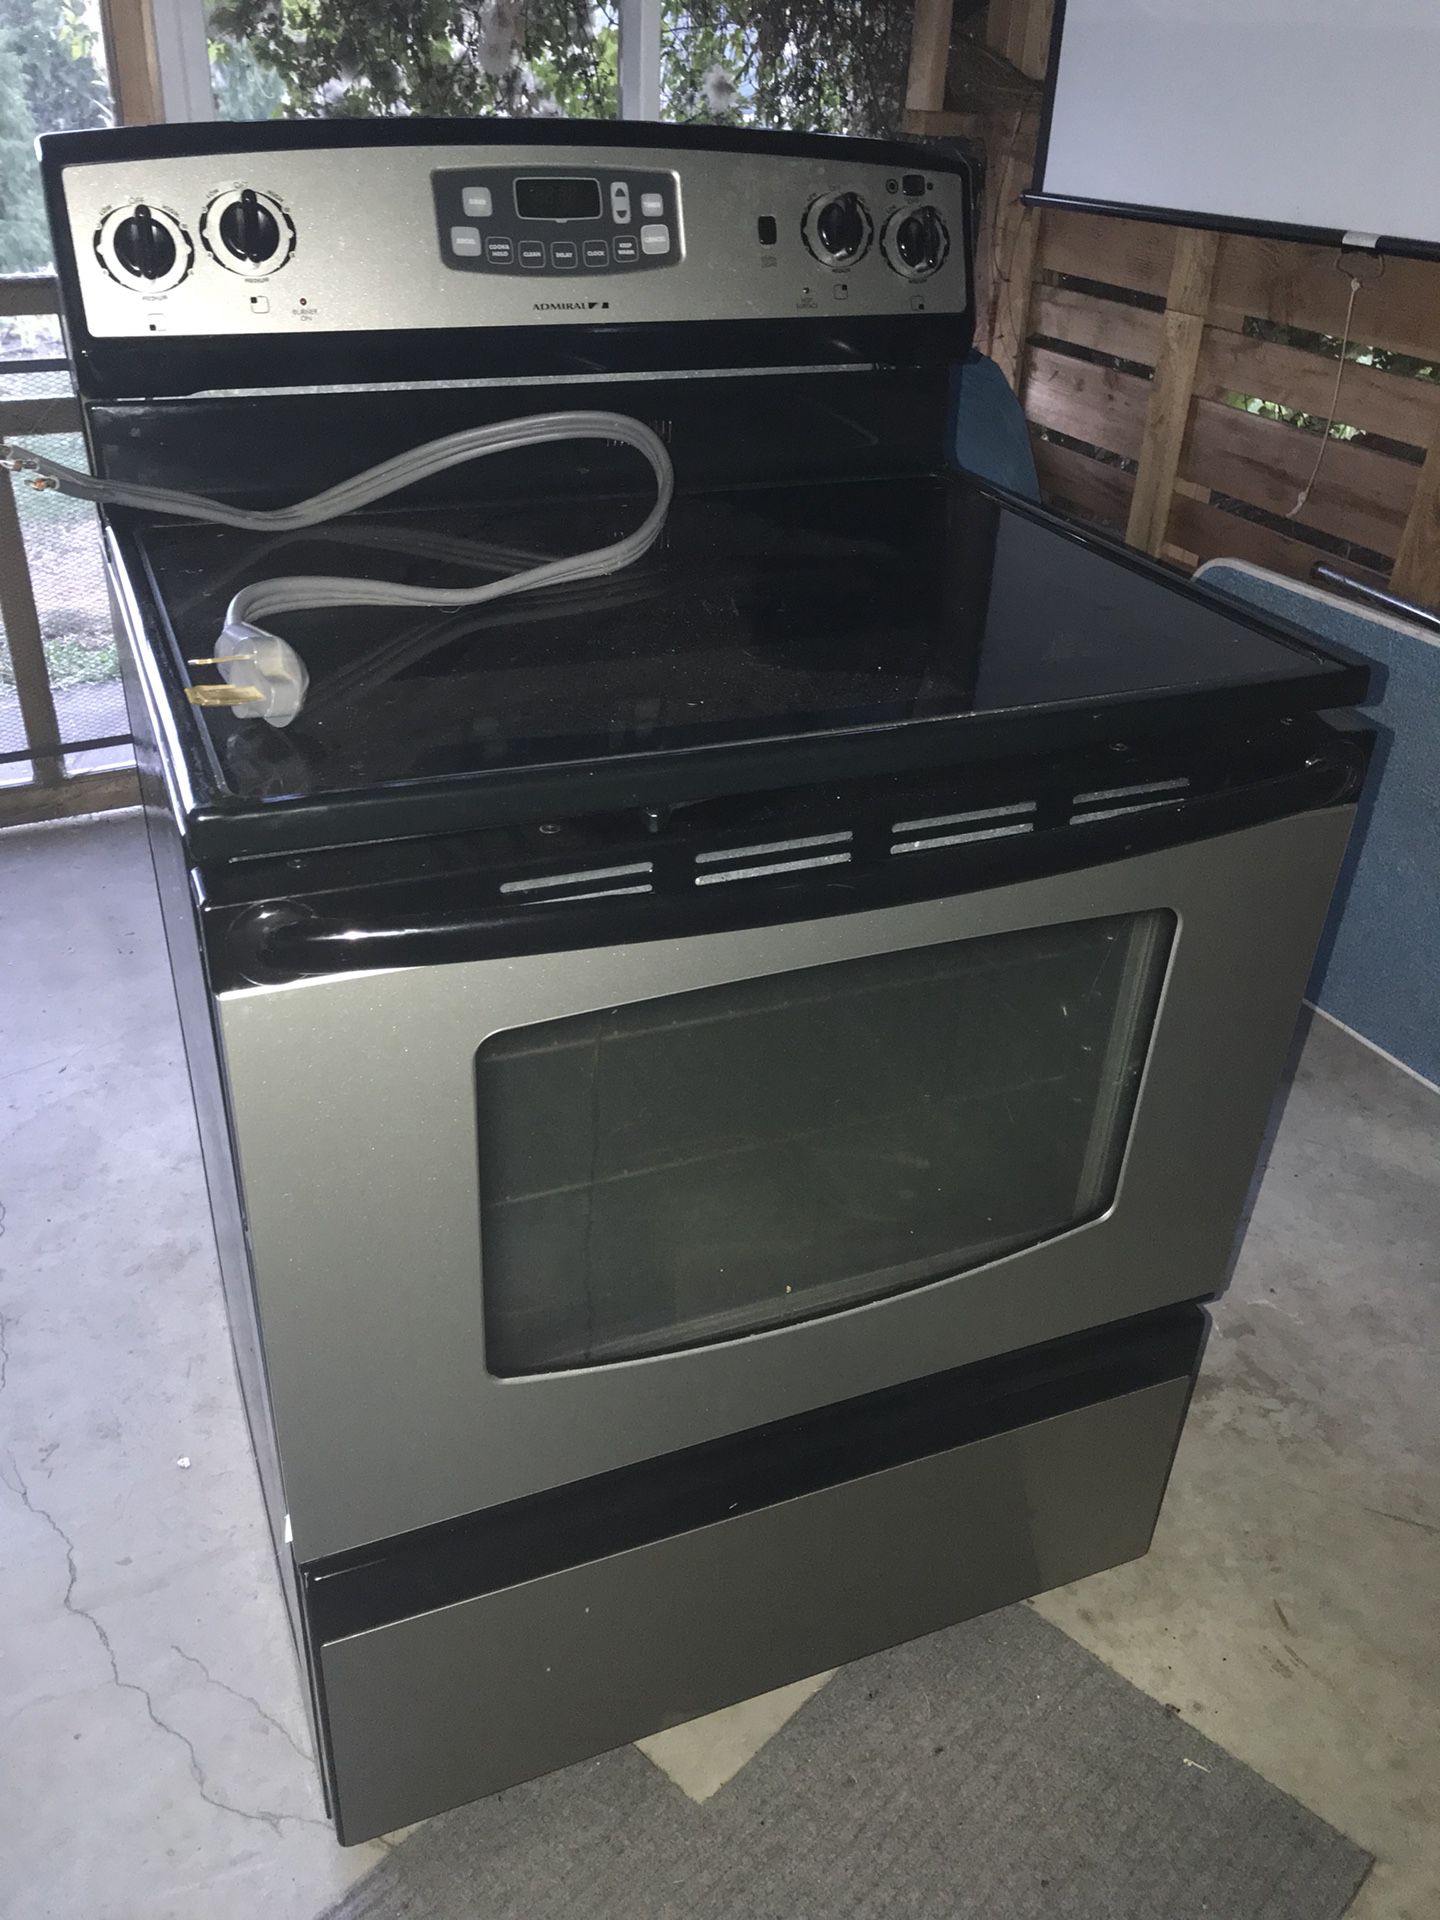 Admiral electric cook stove and oven